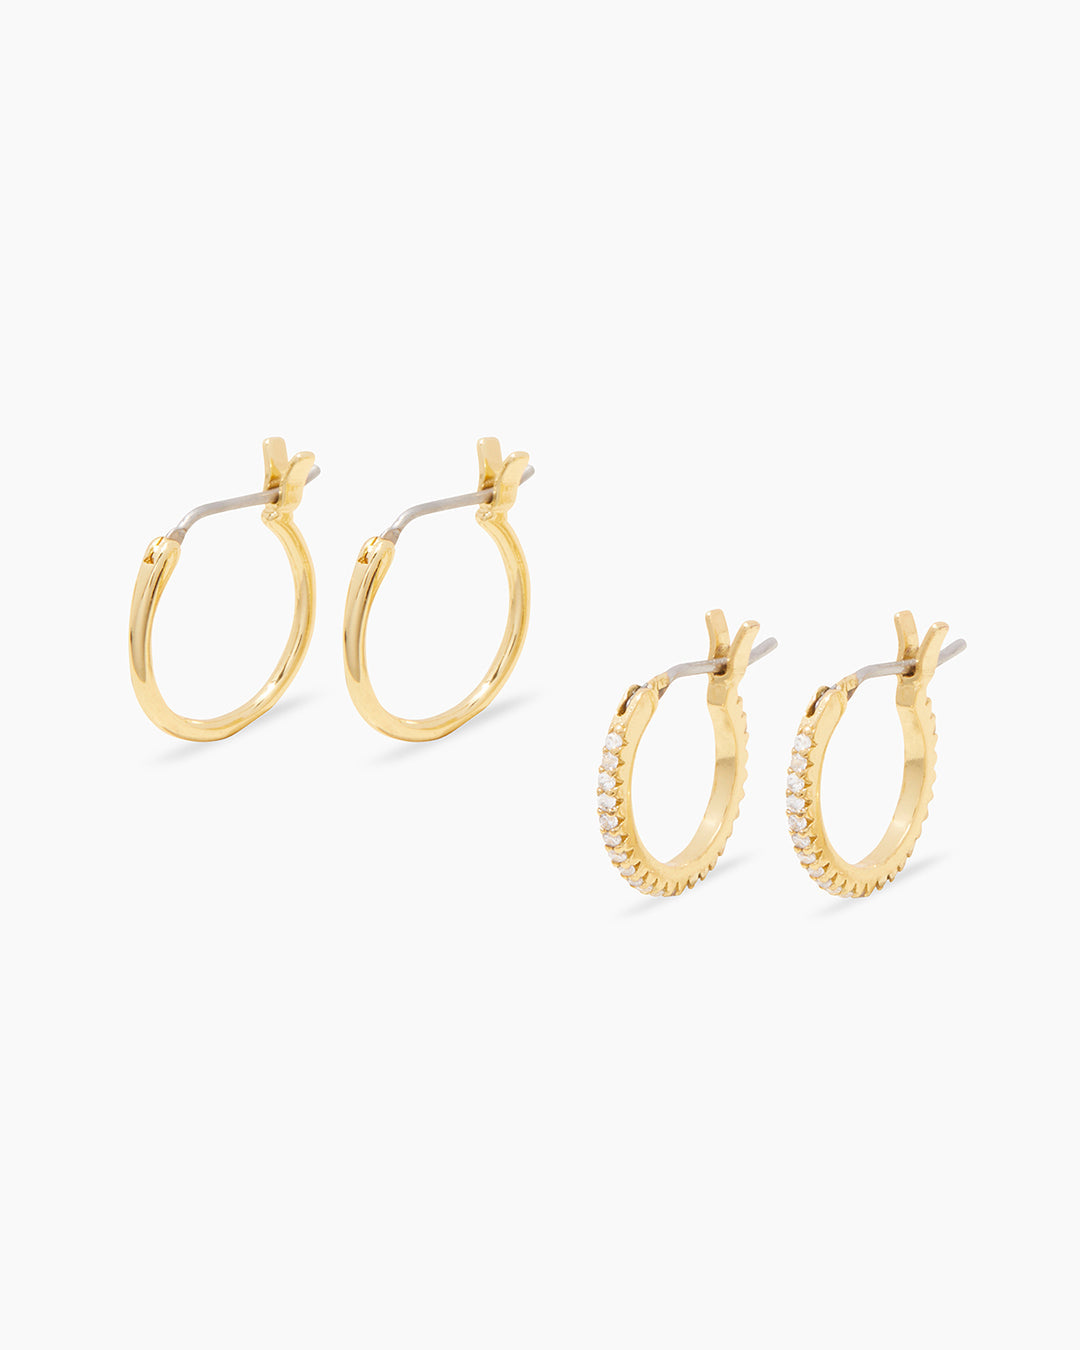 Get Boho Contemporary Gold Star Chain Choker Necklace Earring Set at ₹ 1099  | LBB Shop